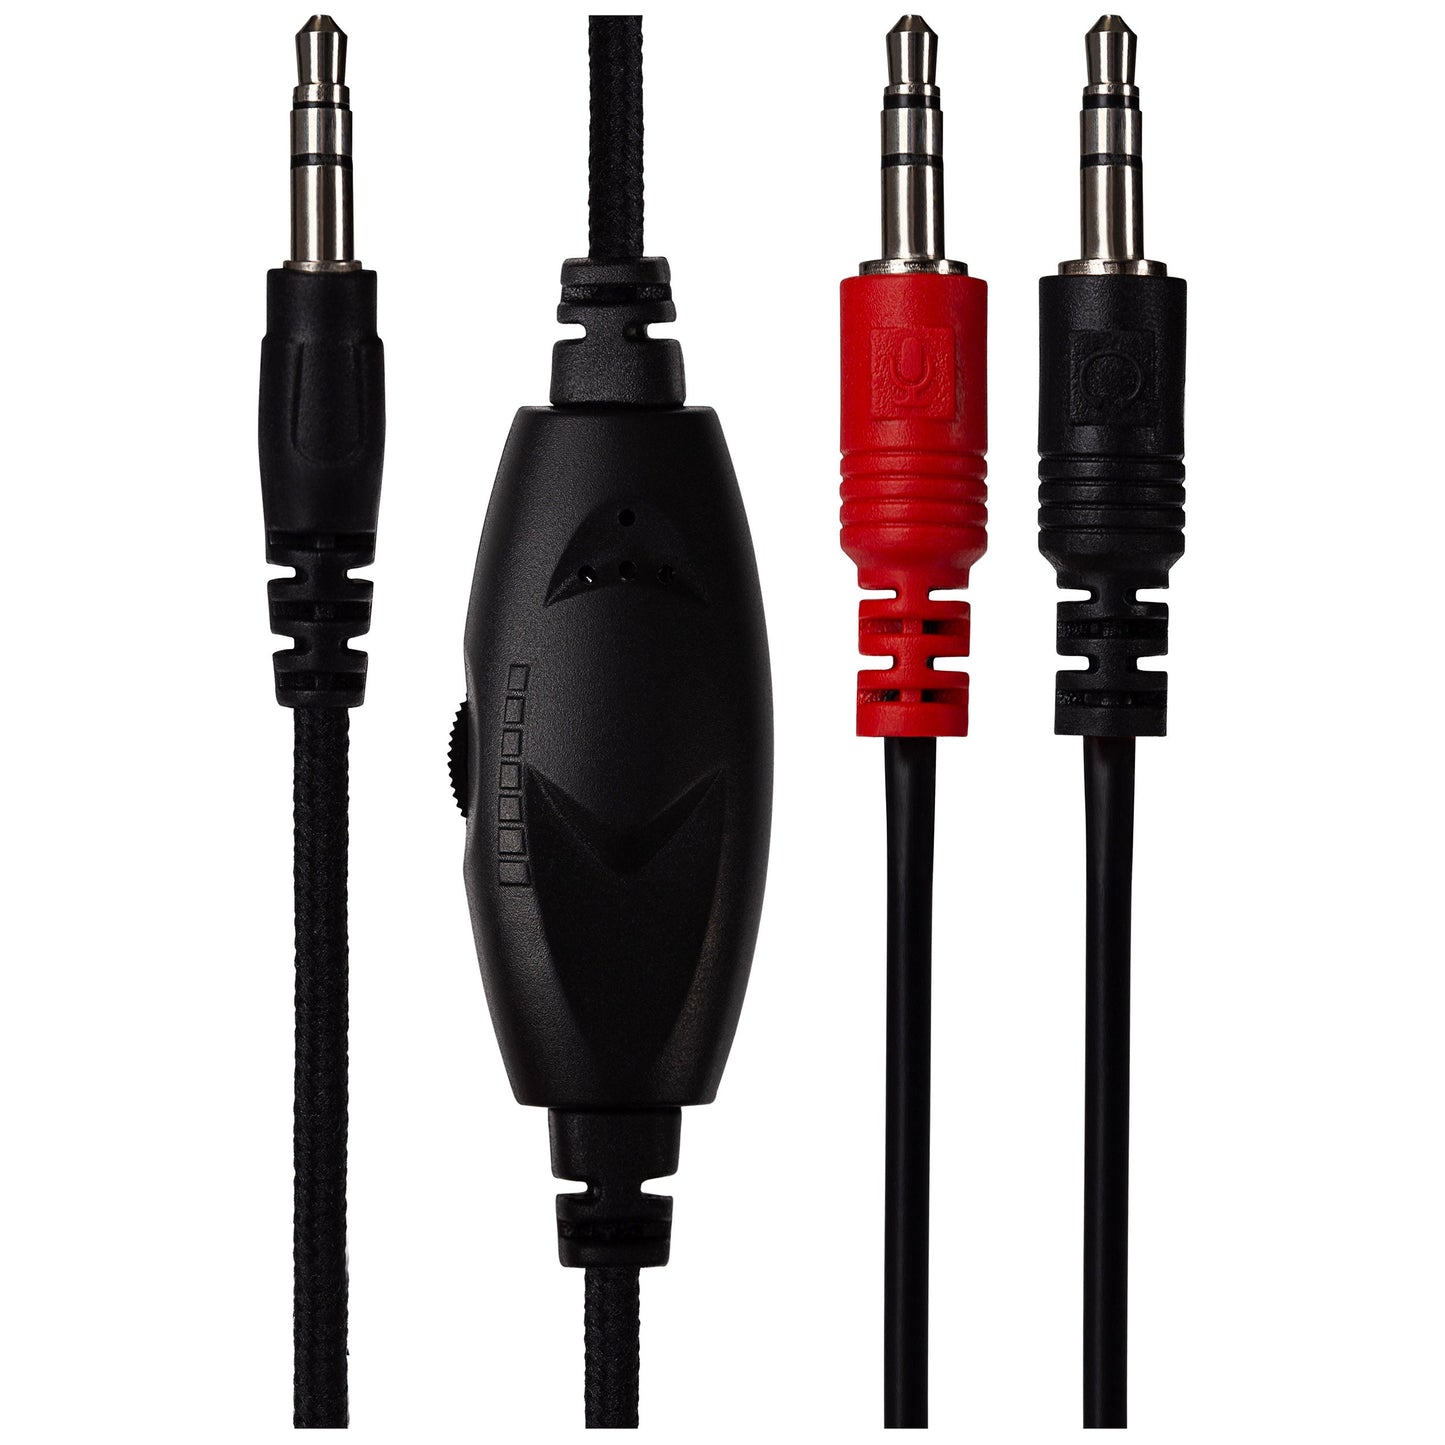 Maplin 3.5mm 3 Pole TRS Jack to Twin 3.5mm 3 Pole TRS Jack Cable with Volume Control - Black, 2m - maplin.co.uk